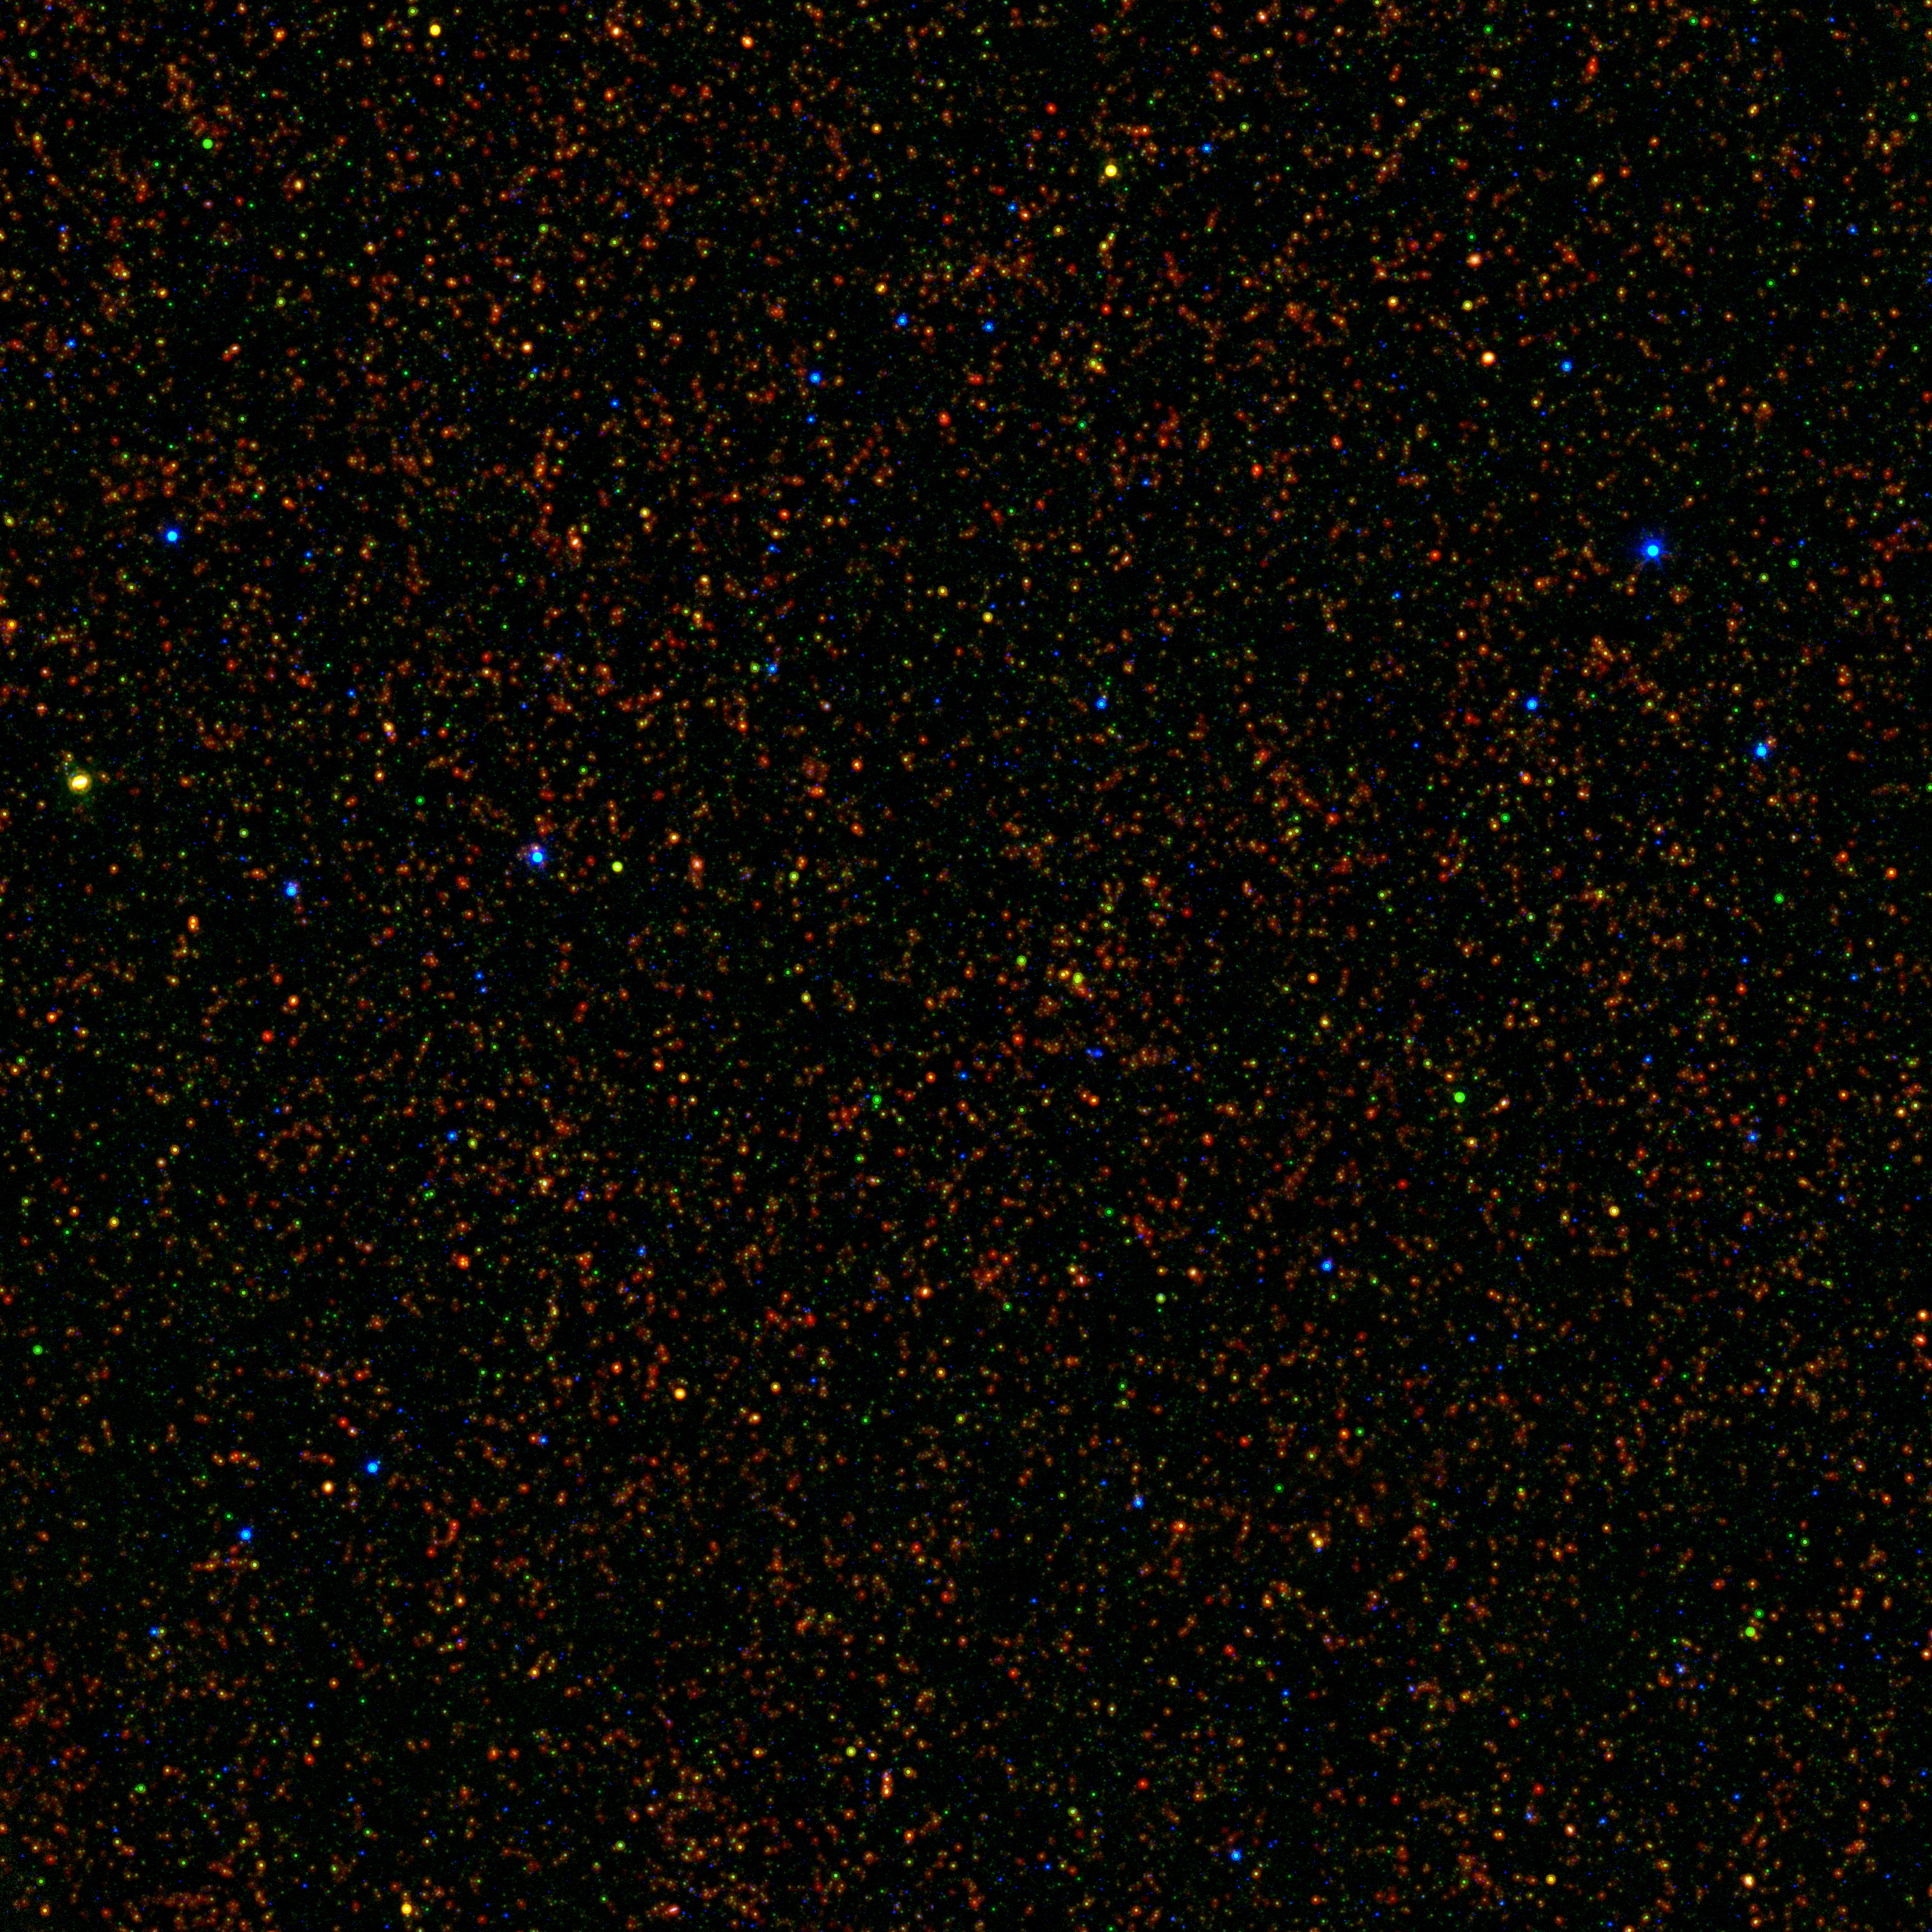 The COSMOS field as seen in the infrared